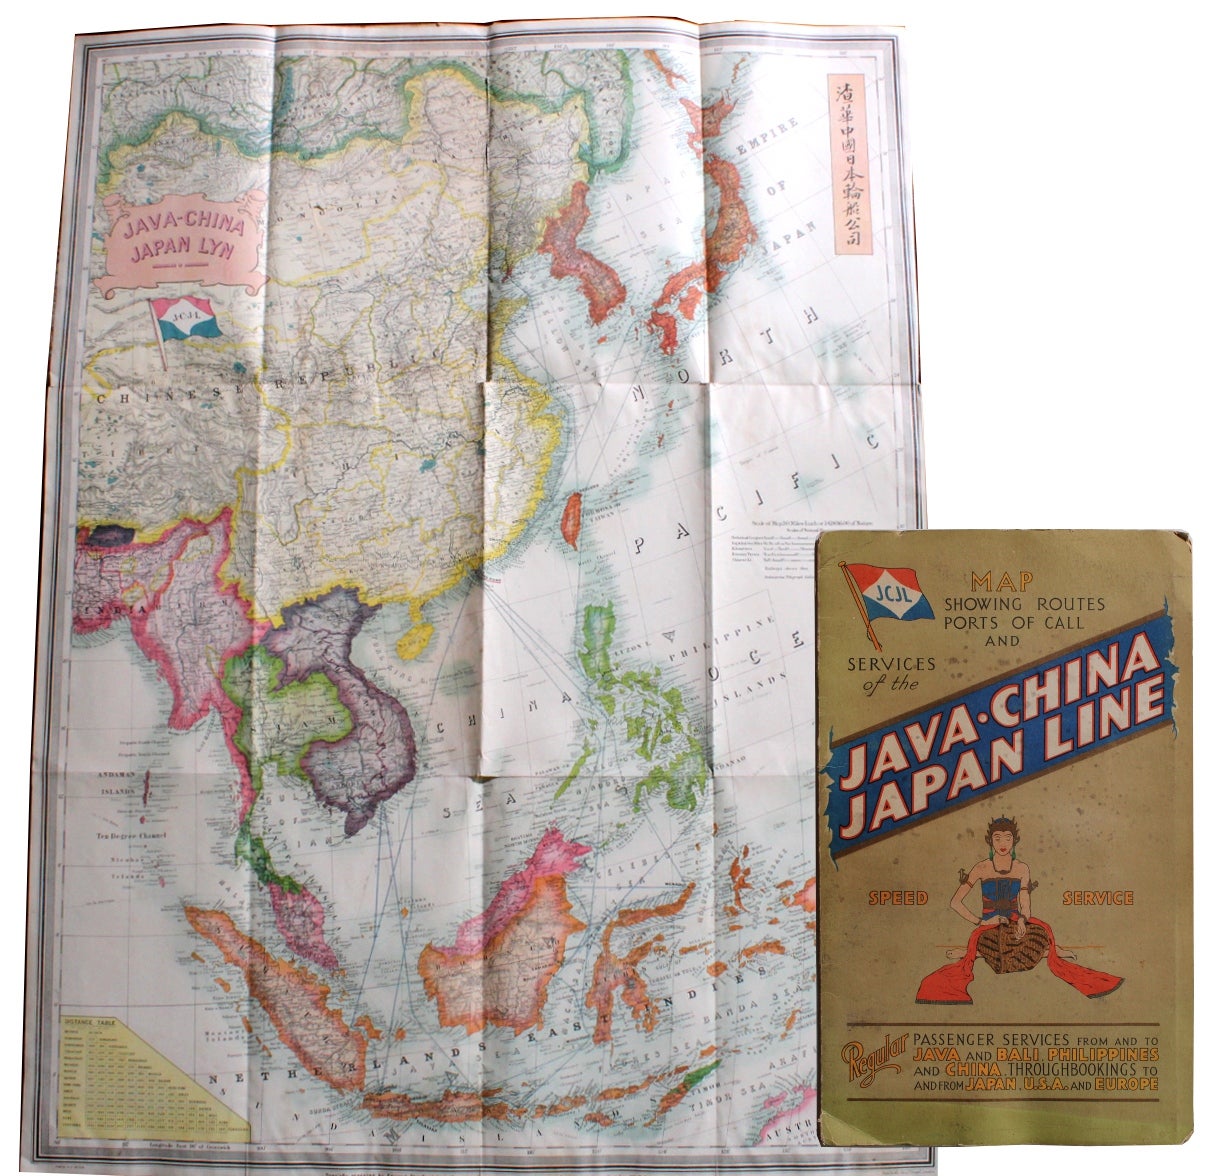 JCJL Map Showing Routes, Ports of Call and Services of the Java–China–Japan Line . ....